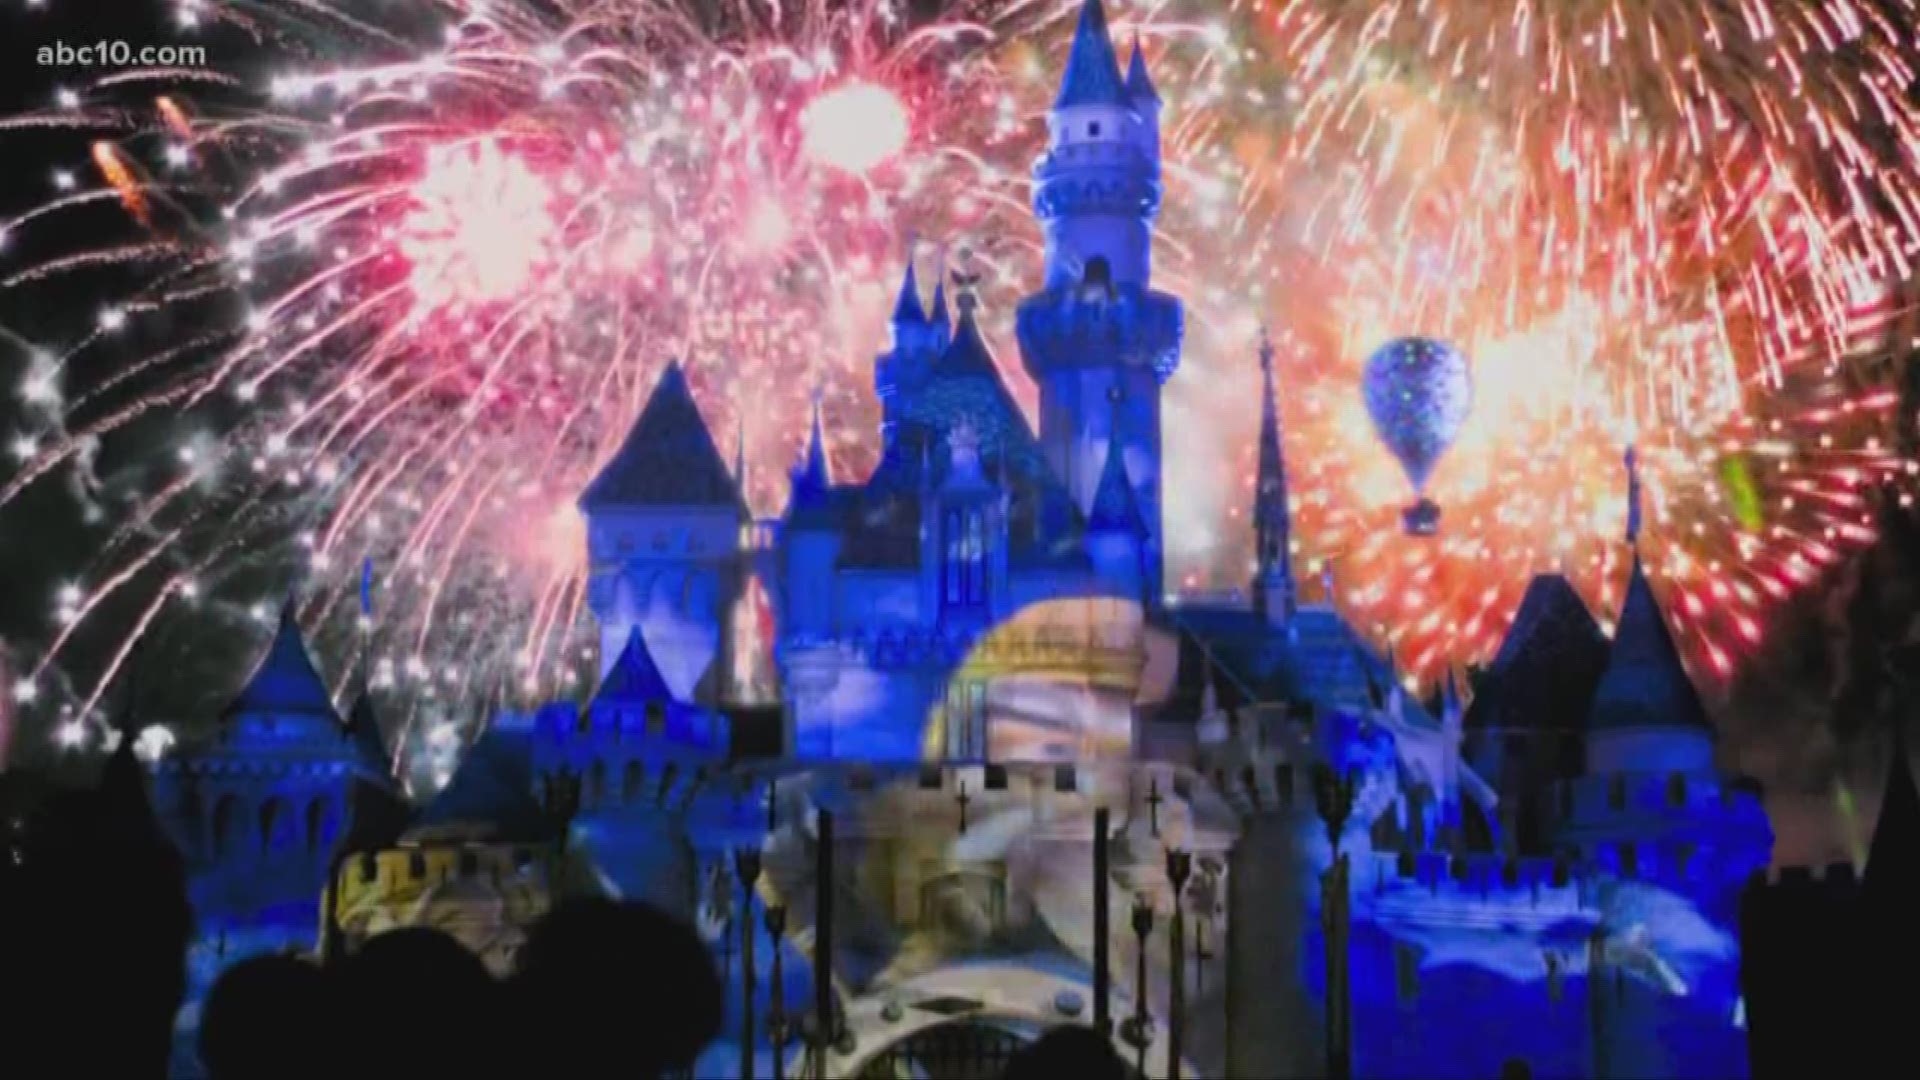 Stop us if you've heard this before. Disneyland is increasing its ticket prices to start the new year. Ariane Datil has your trending news.